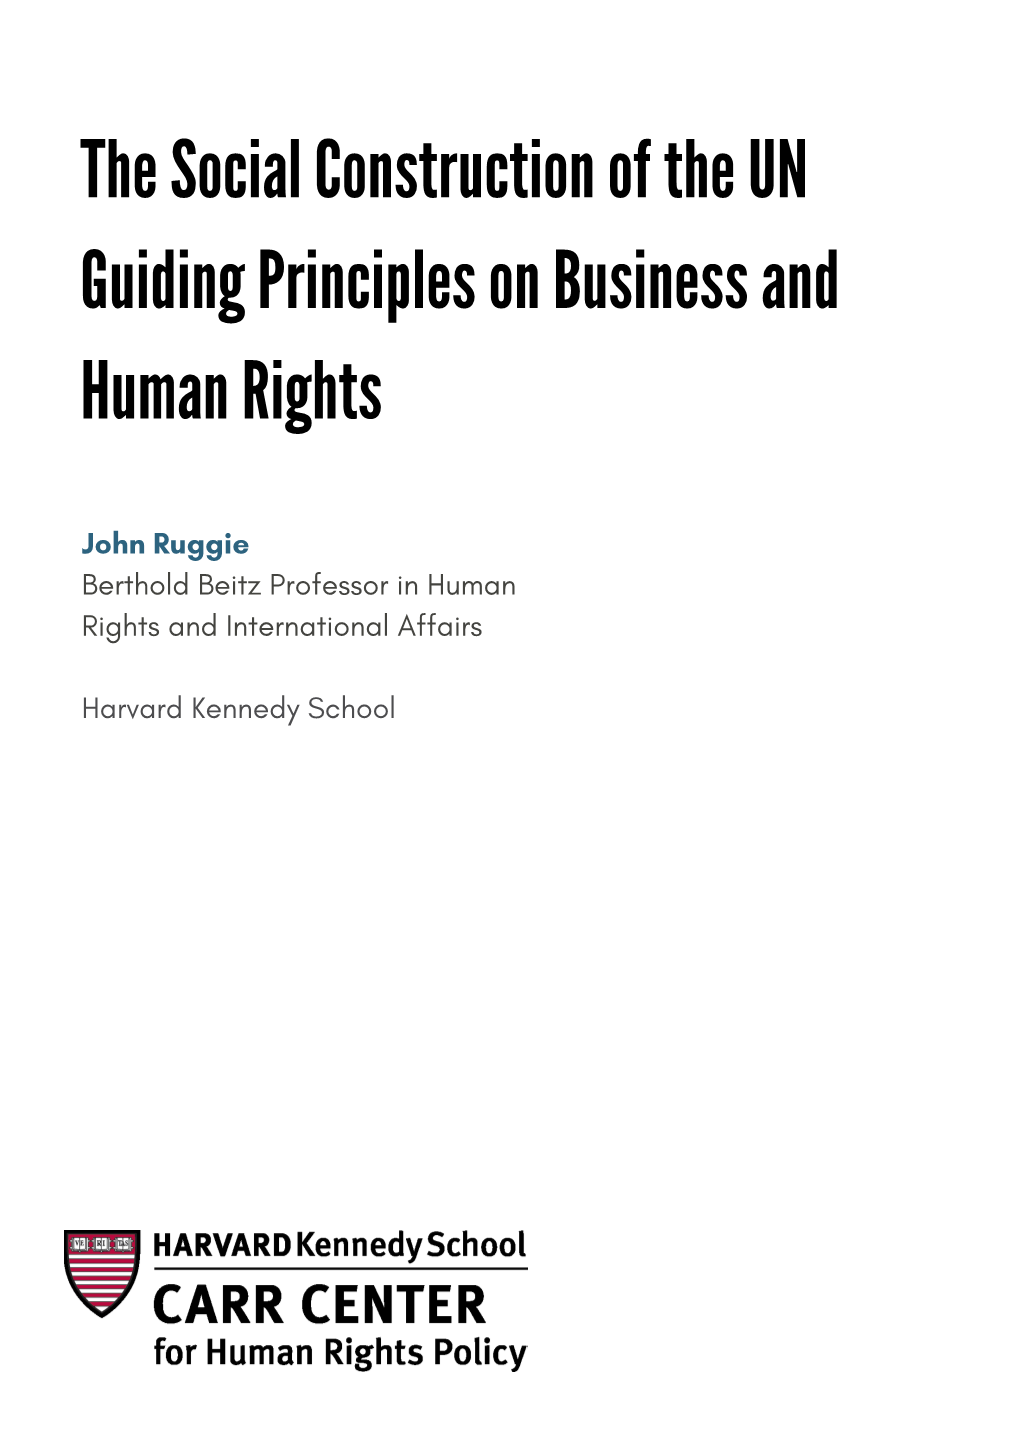 The Social Construction of the UN Guiding Principles on Business and Human Rights